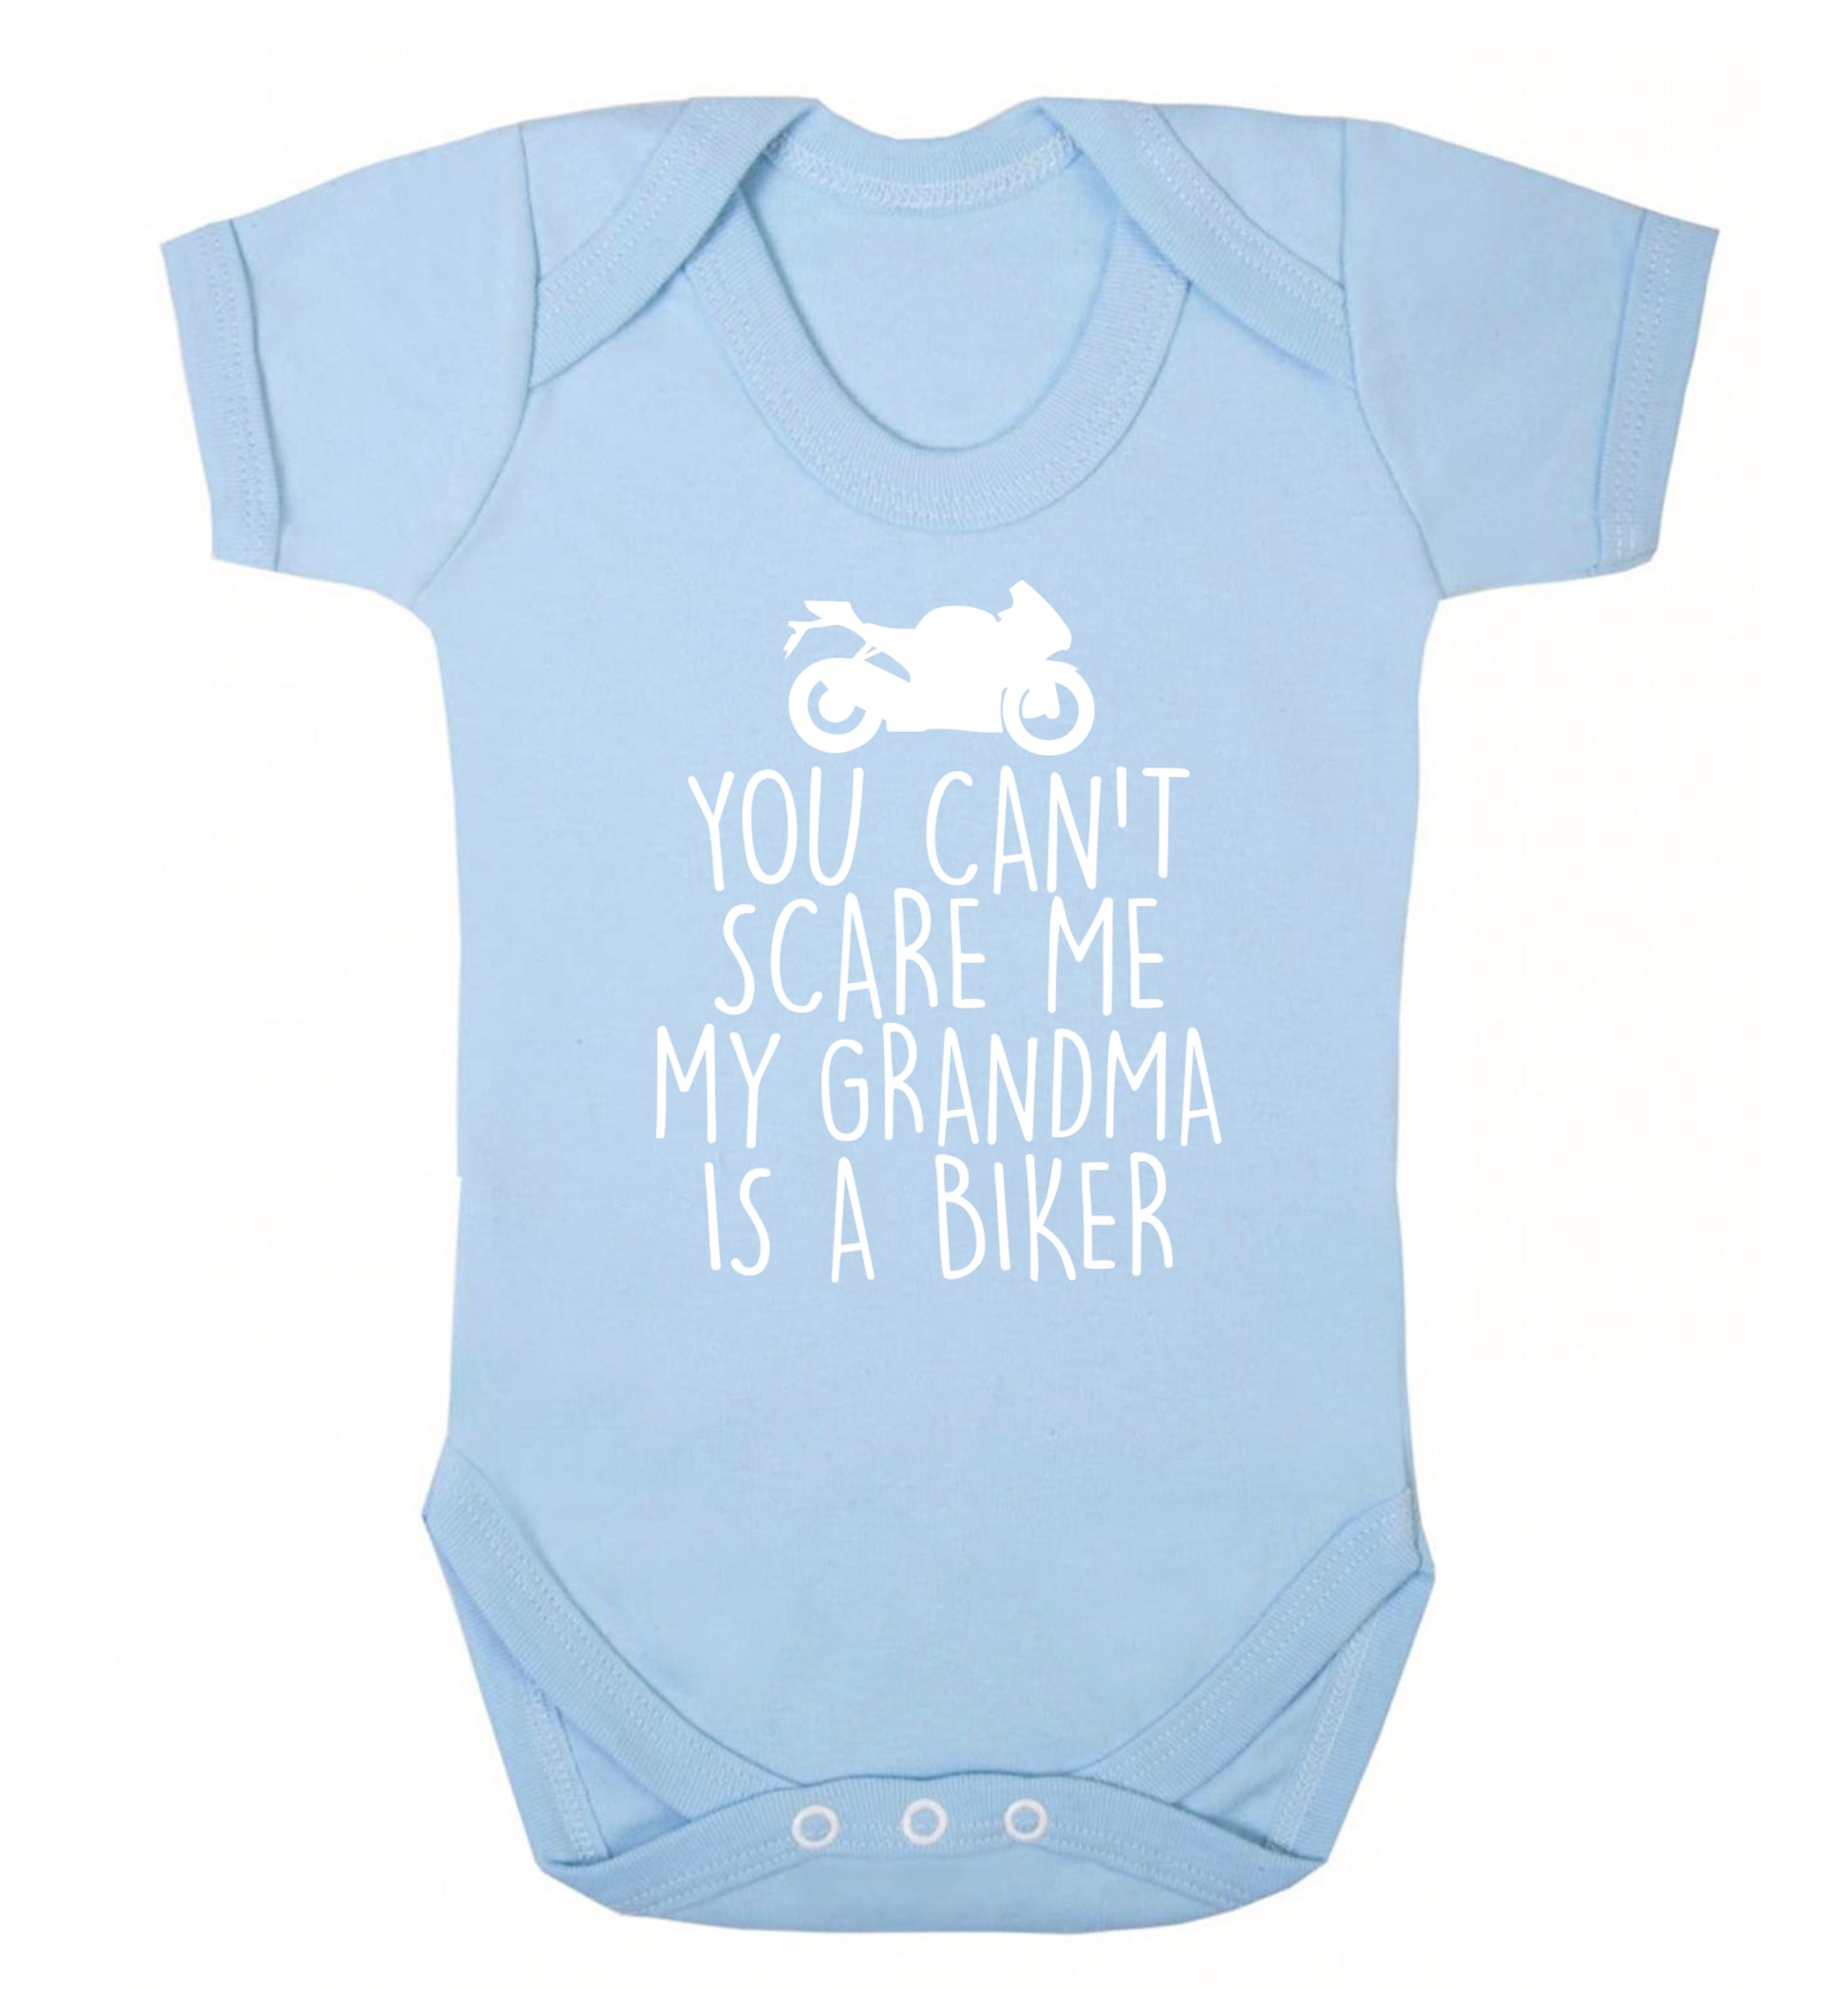 You can't scare me my grandma is a biker Baby Vest pale blue 18-24 months